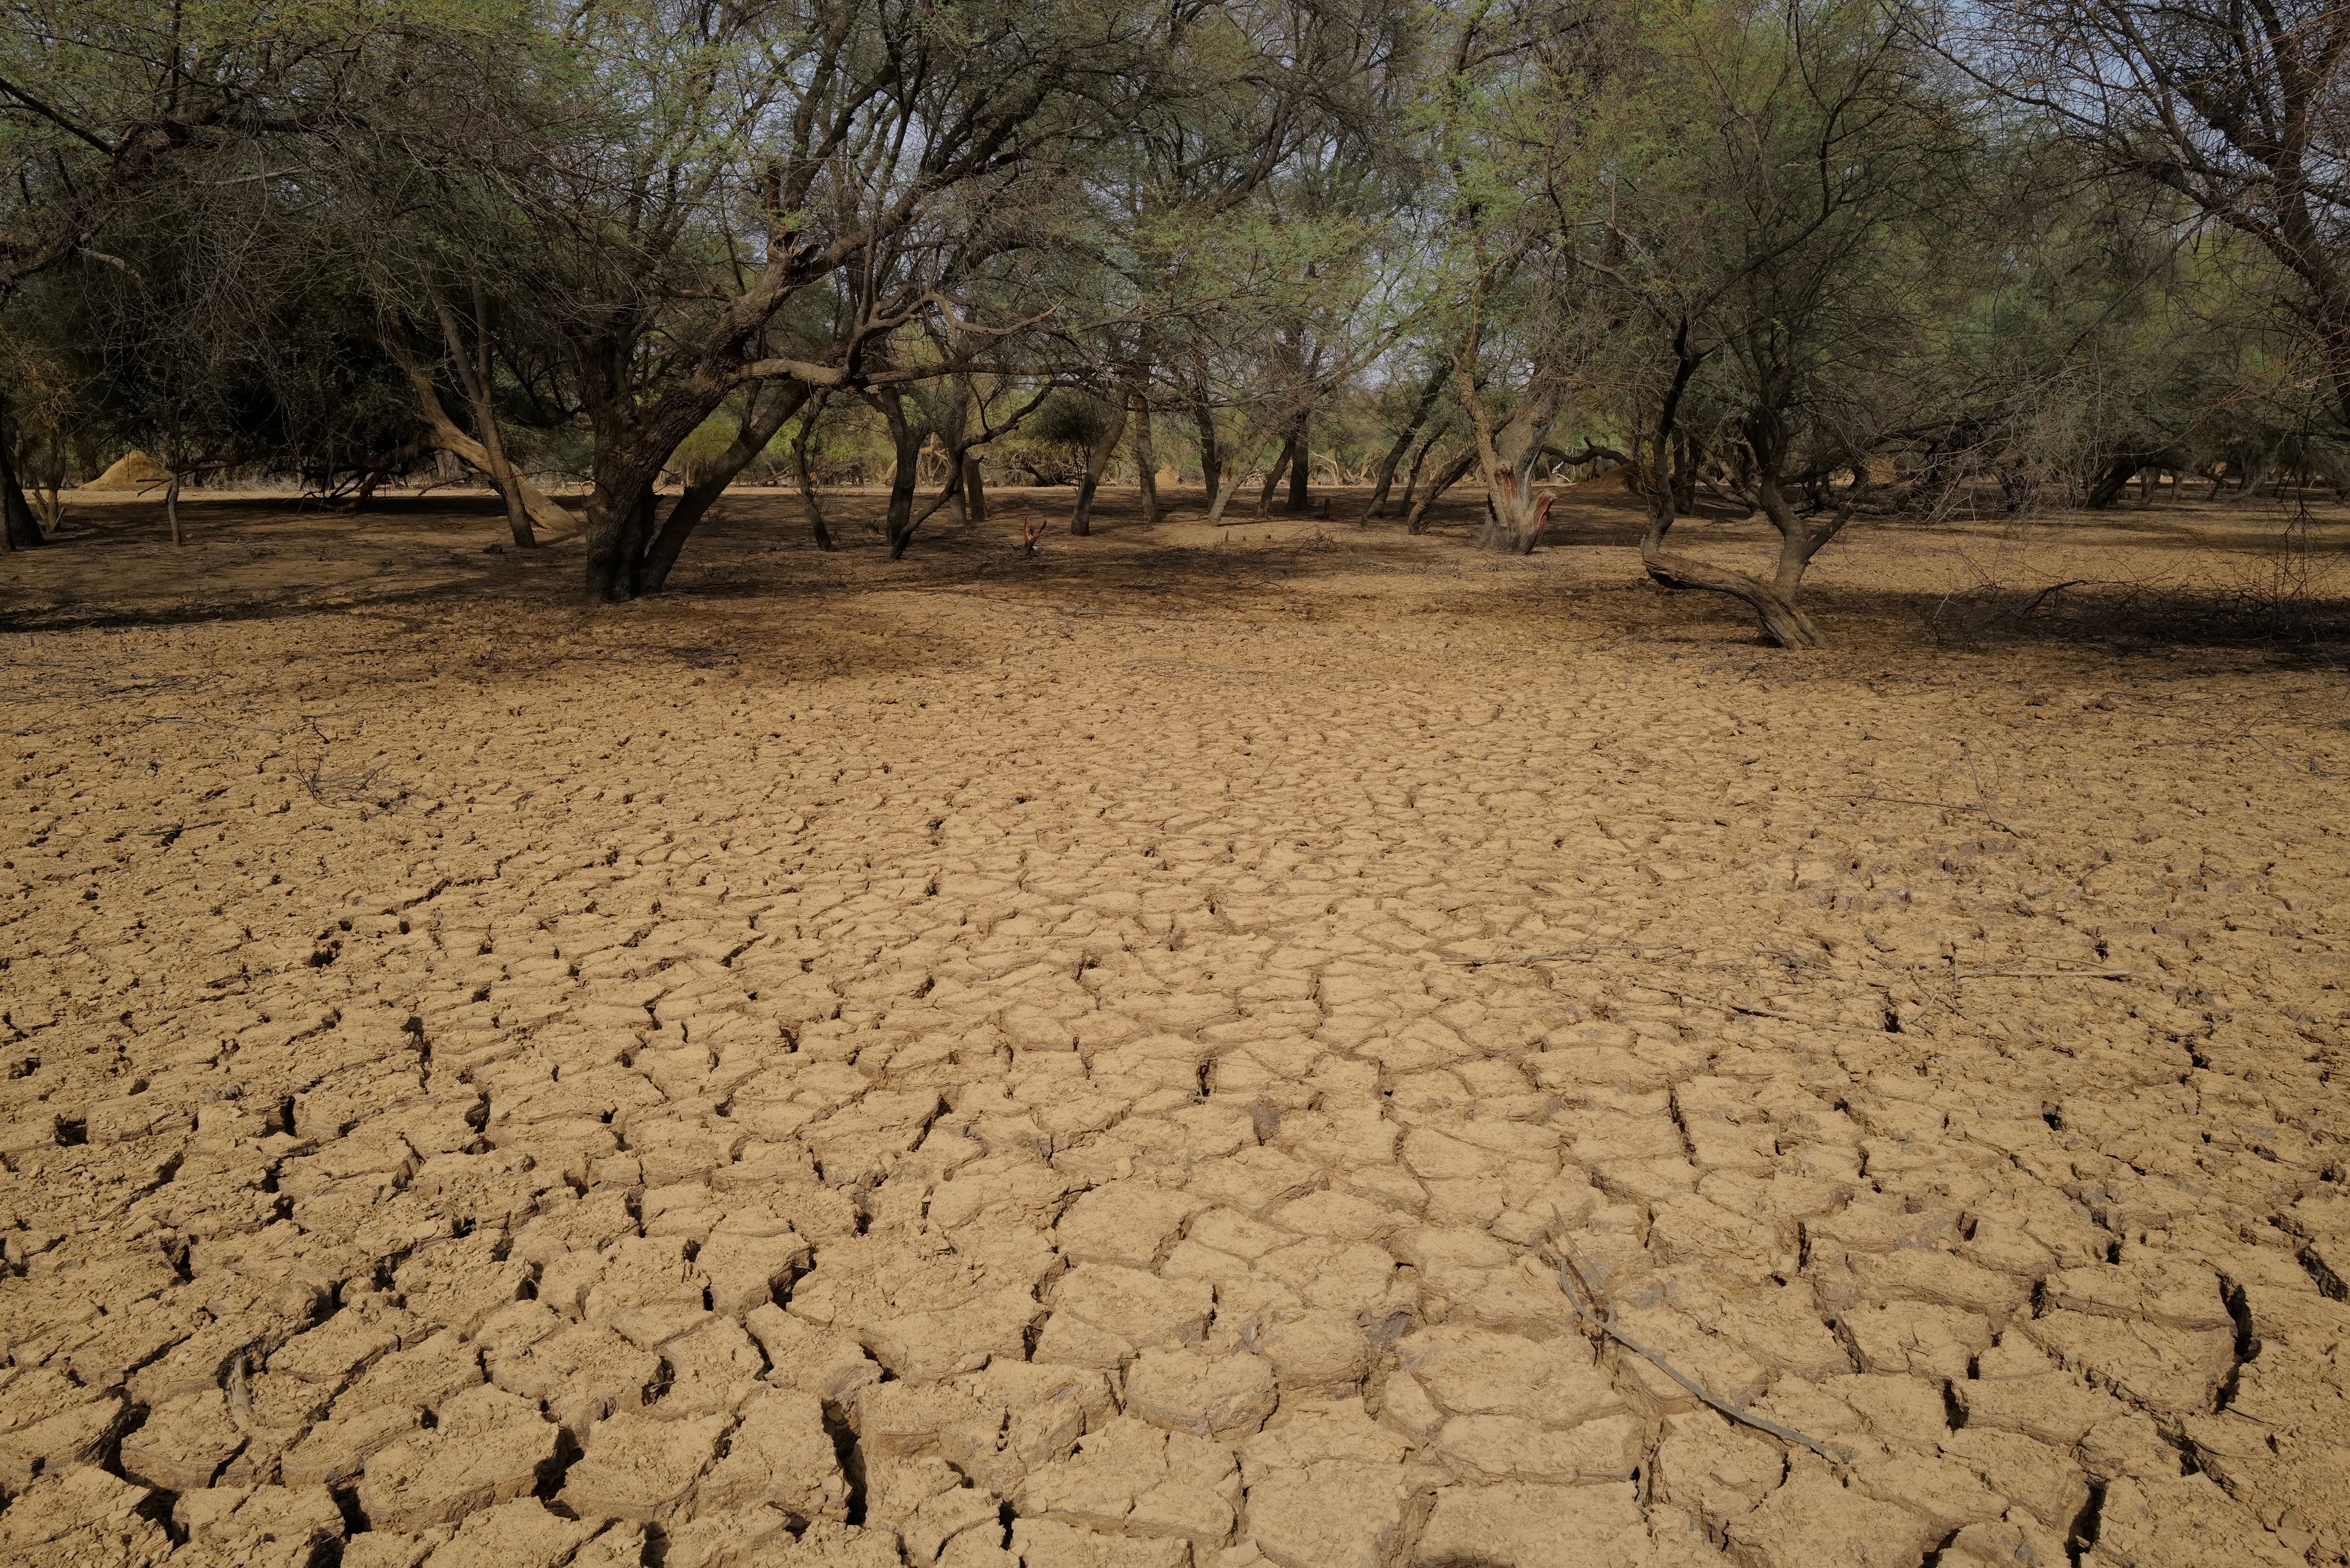 african drought problems